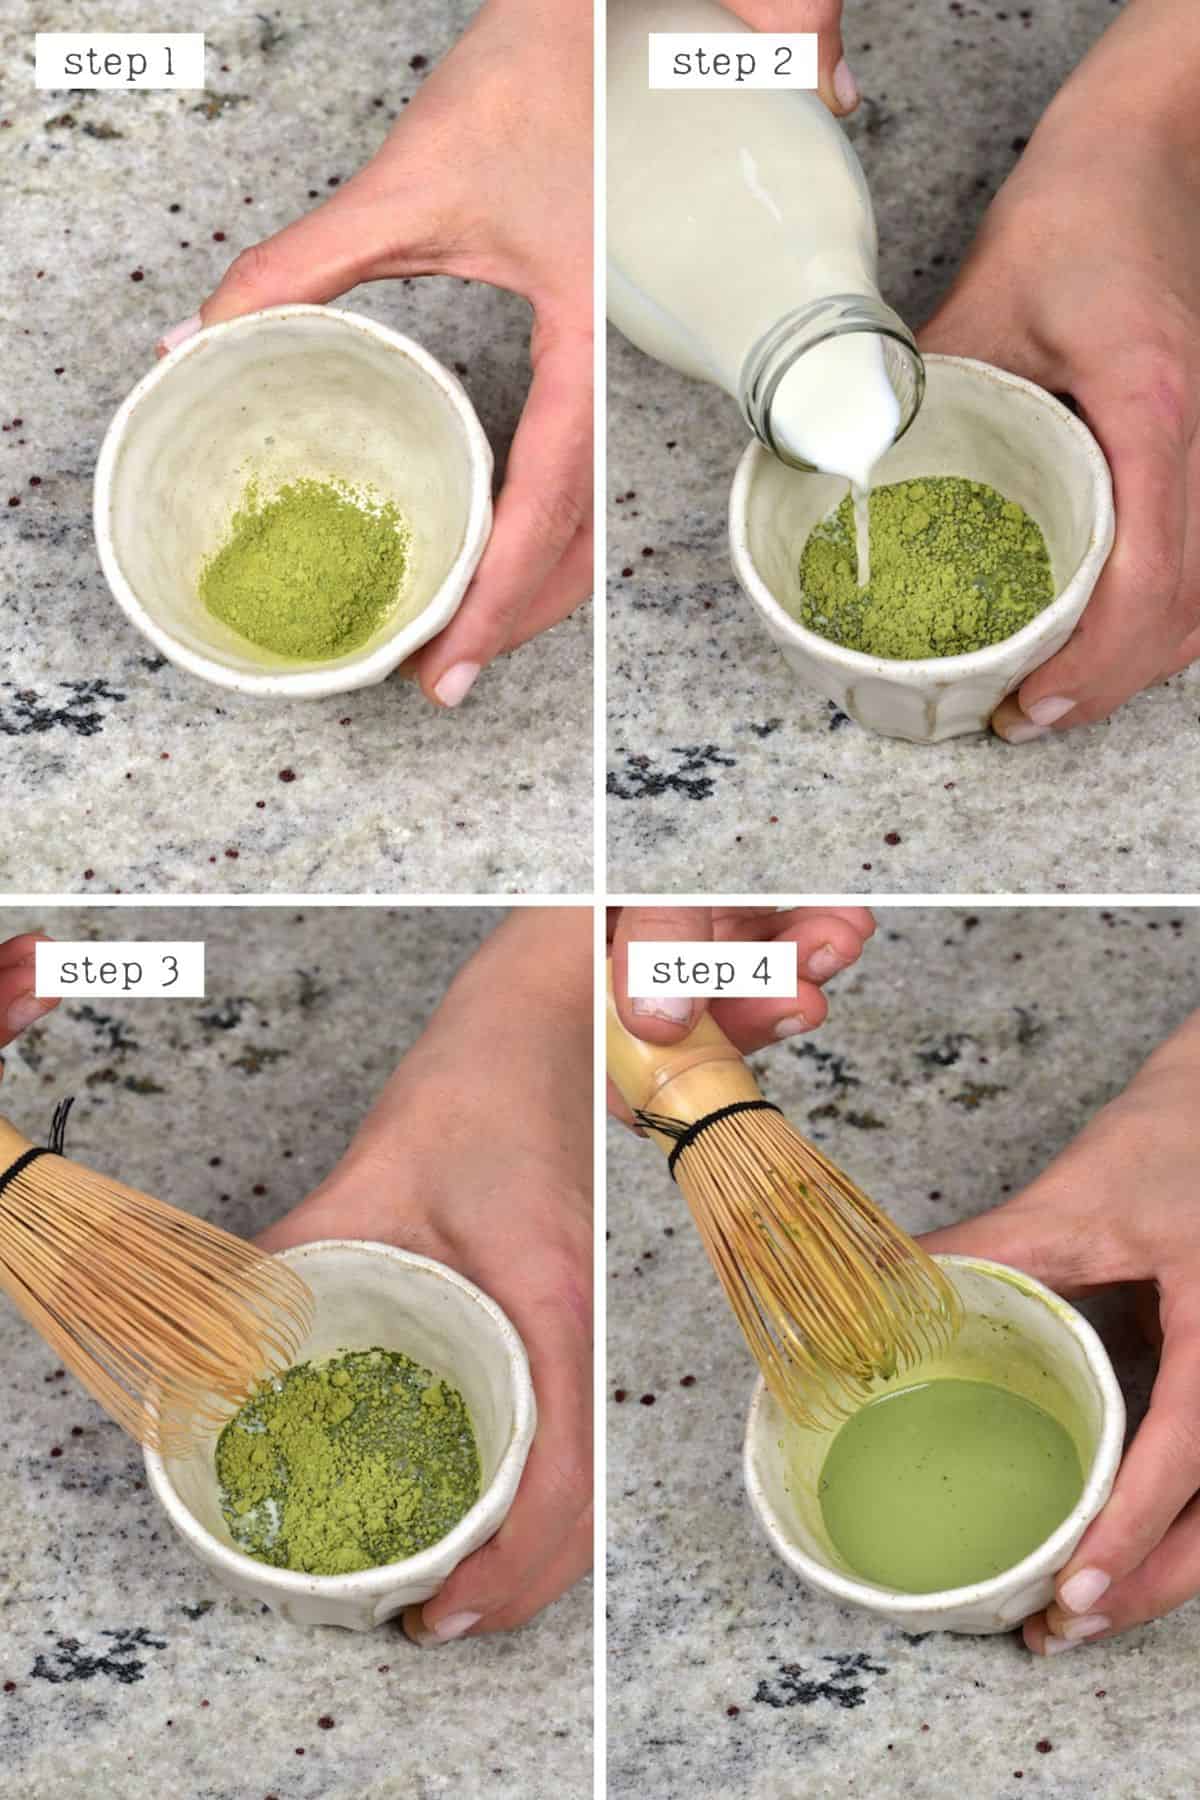 https://www.alphafoodie.com/wp-content/uploads/2020/11/Steps-for-mixing-matcha.jpg